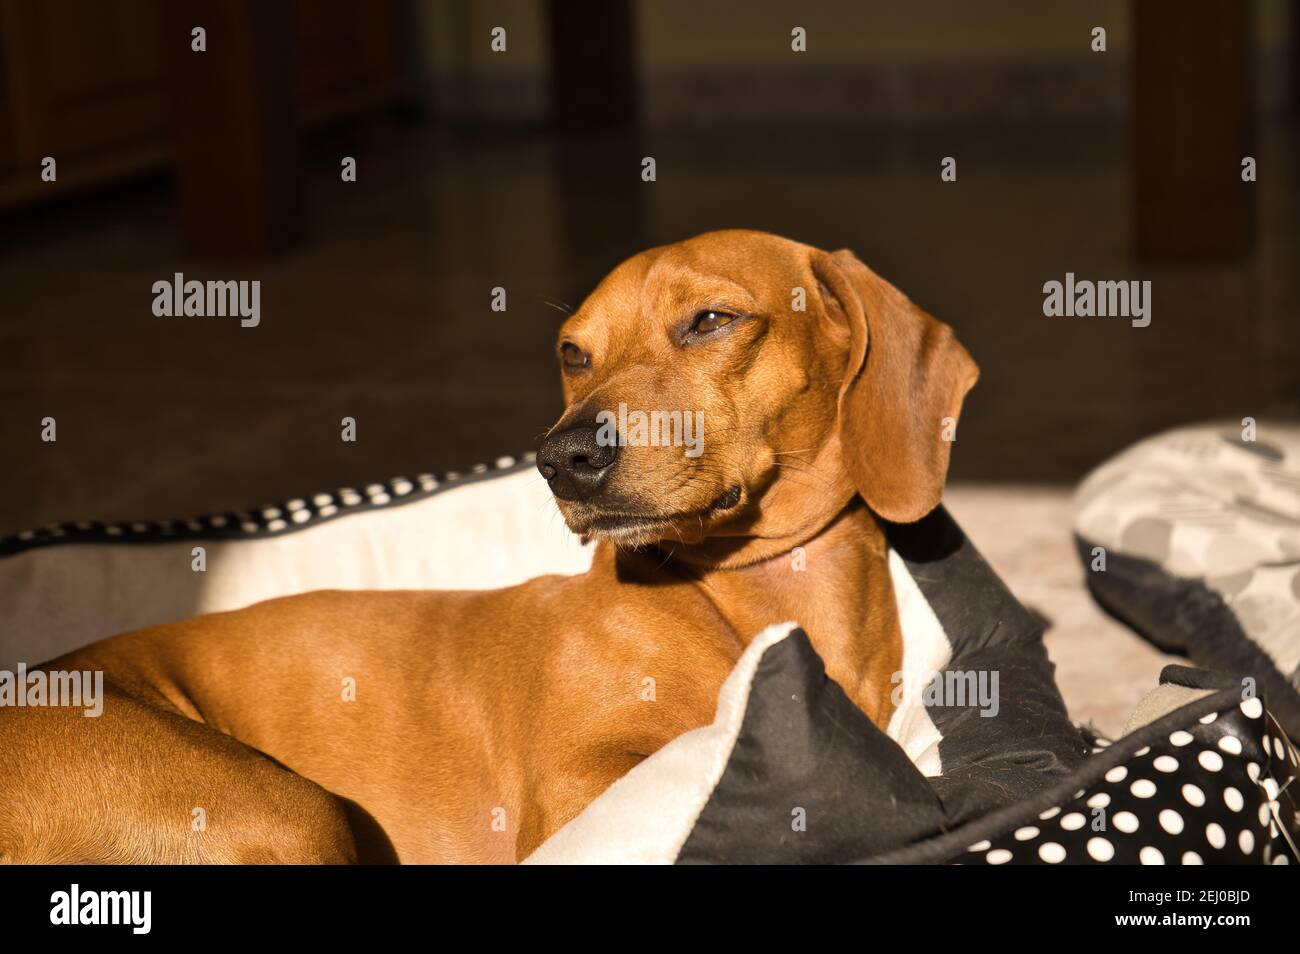 Beautiful purebred dachshund dog, also called teckel, Viennese dog or sausage dog, on a dog bed looking at the camera. Dog Stock Photo